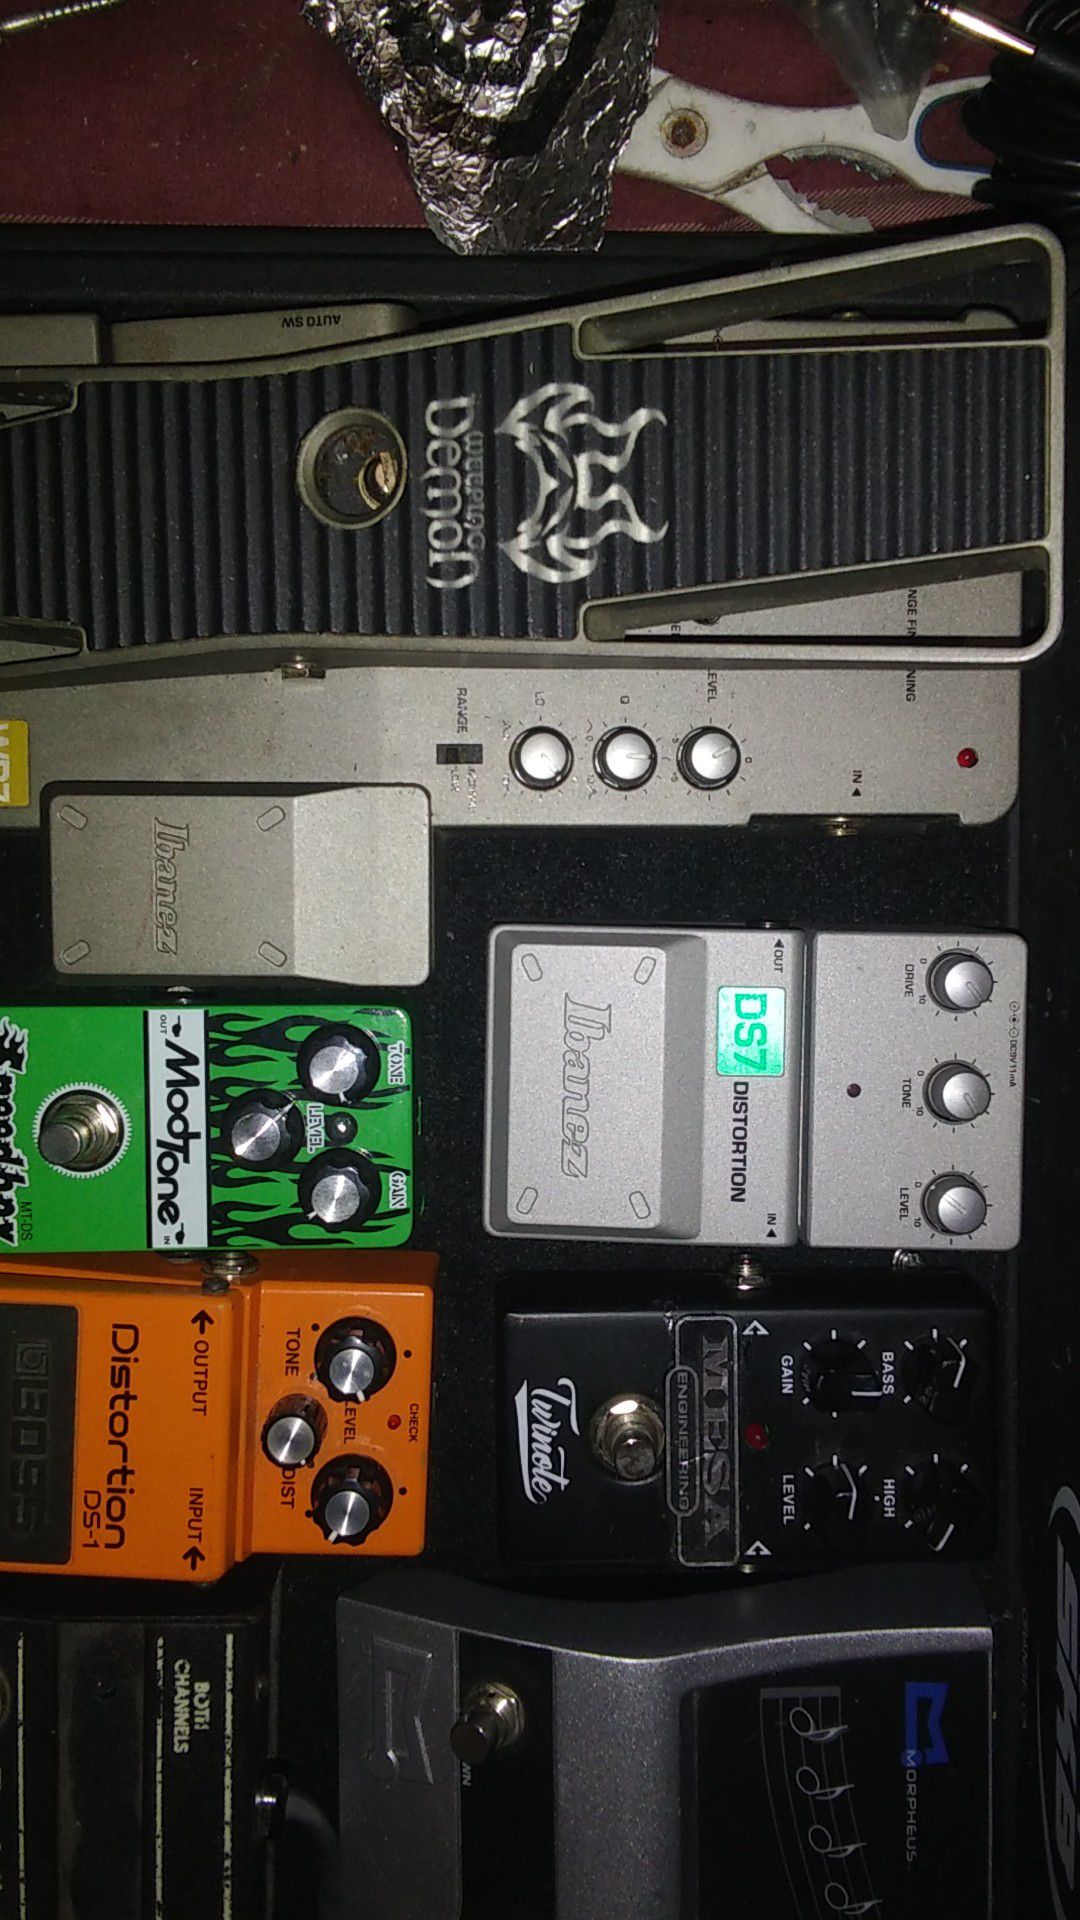 GUITAR FX//EFFECTS PEDALS & XL SKB POWERED PEDALBOARD, MARSHALL PDLS, (3 have sold, BOOGIE, ds1, Randall. Replaced w marshal pedals)